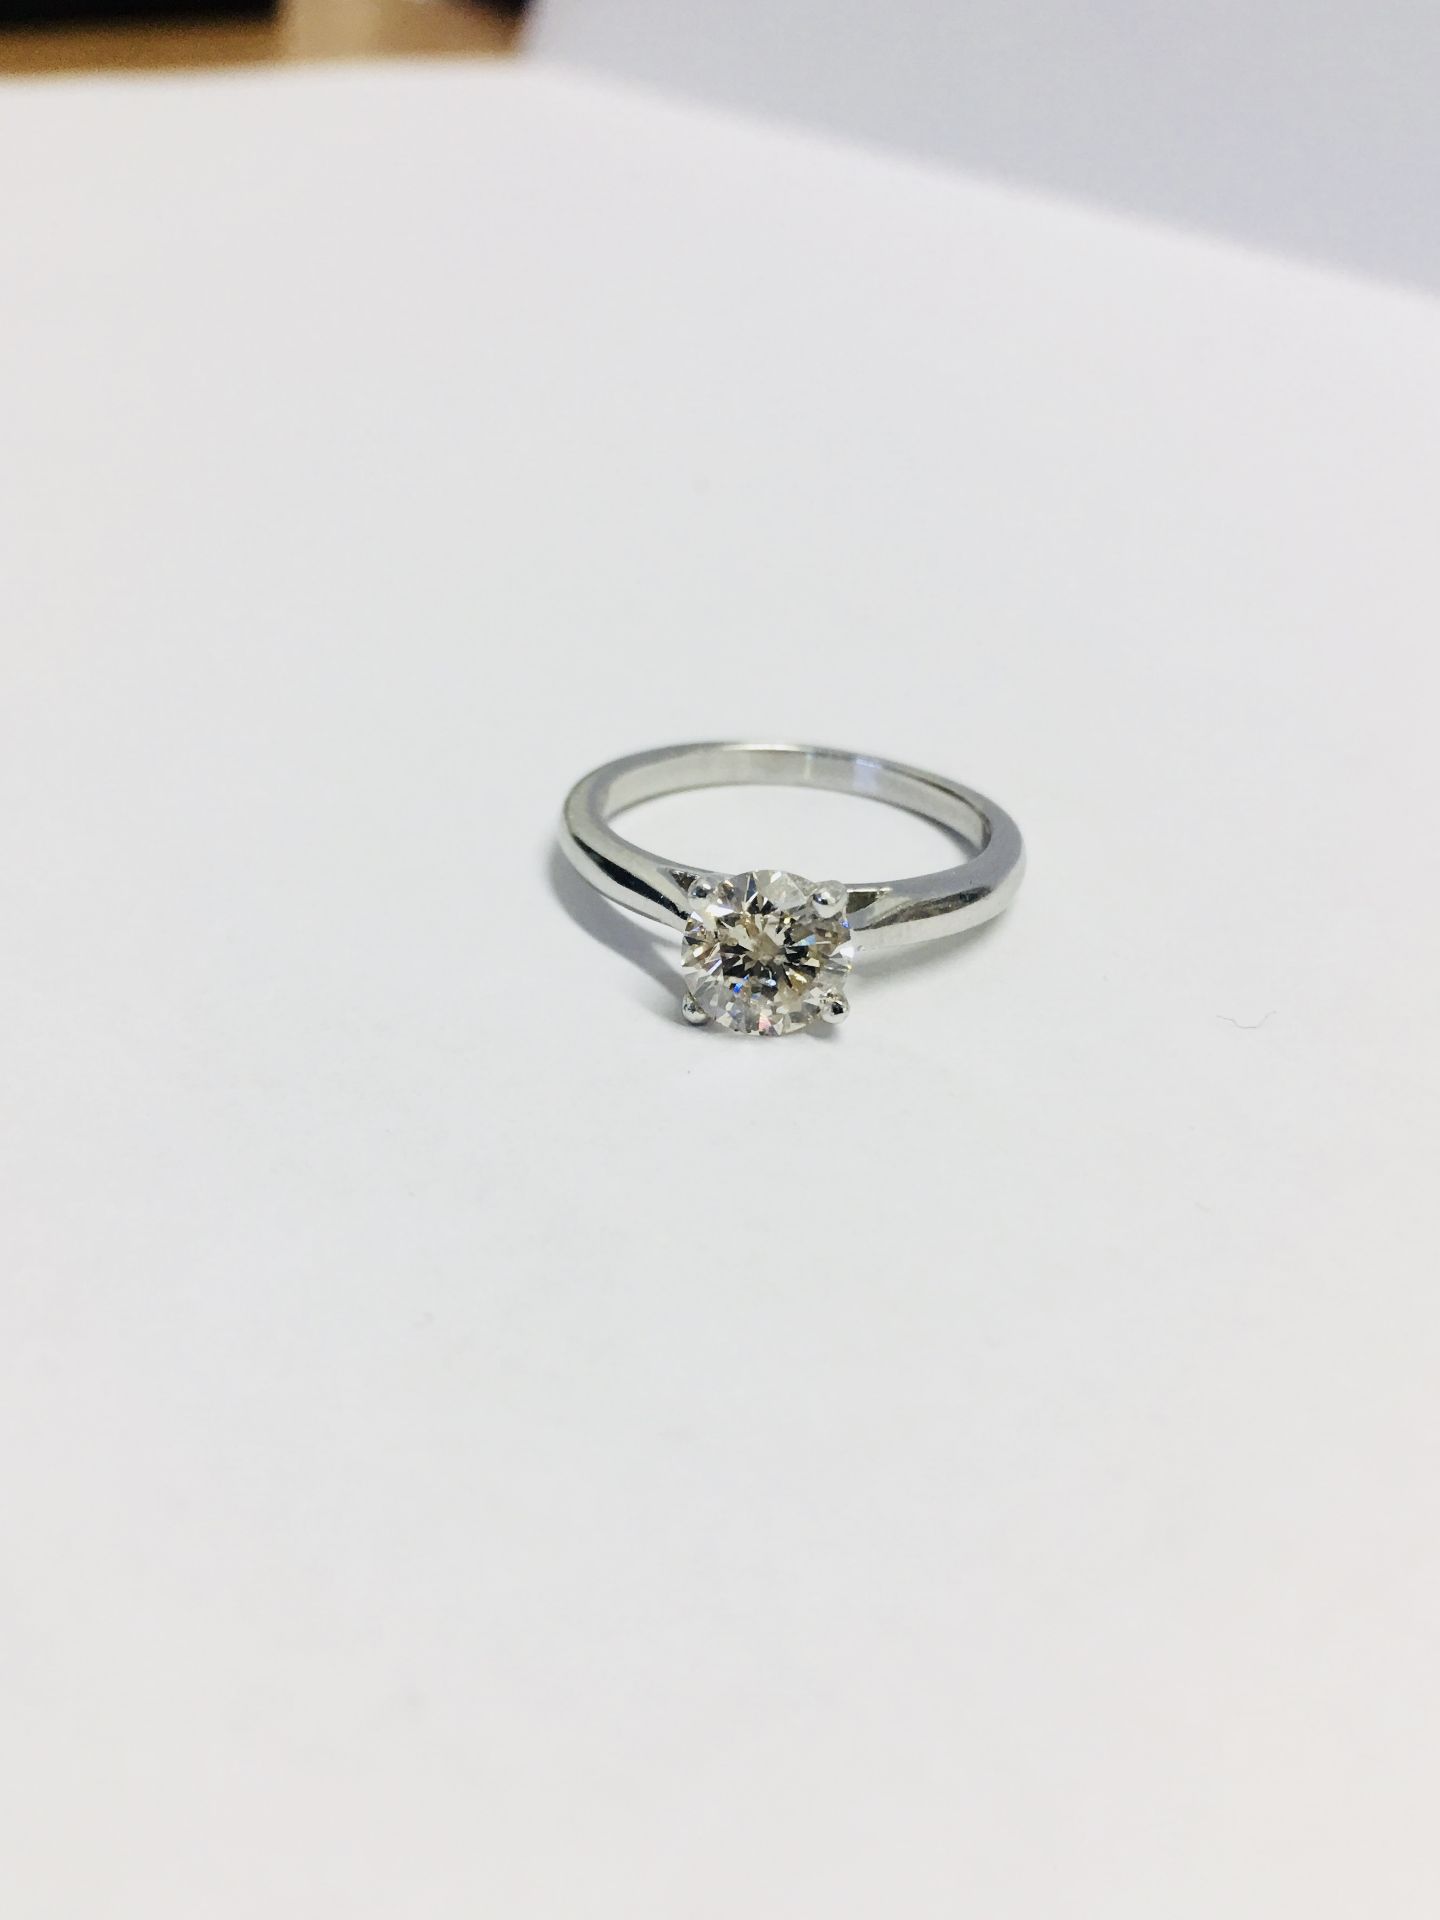 1.01Ct Diamond Solitaire Ring Set In 18Ct White Gold.